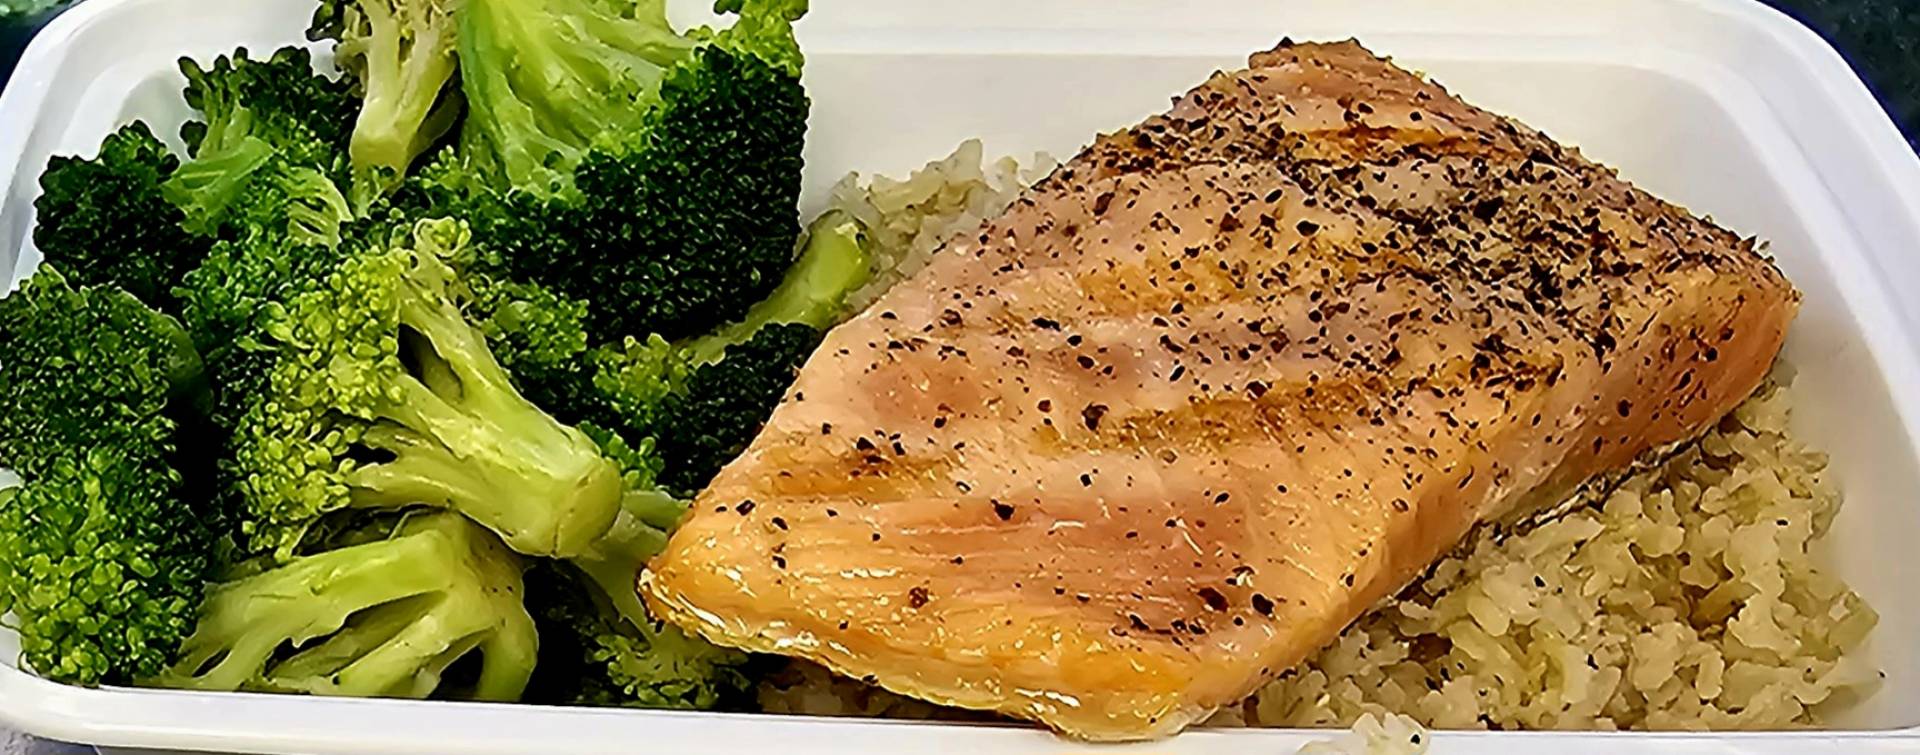 Grilled Salmon | CLEAN